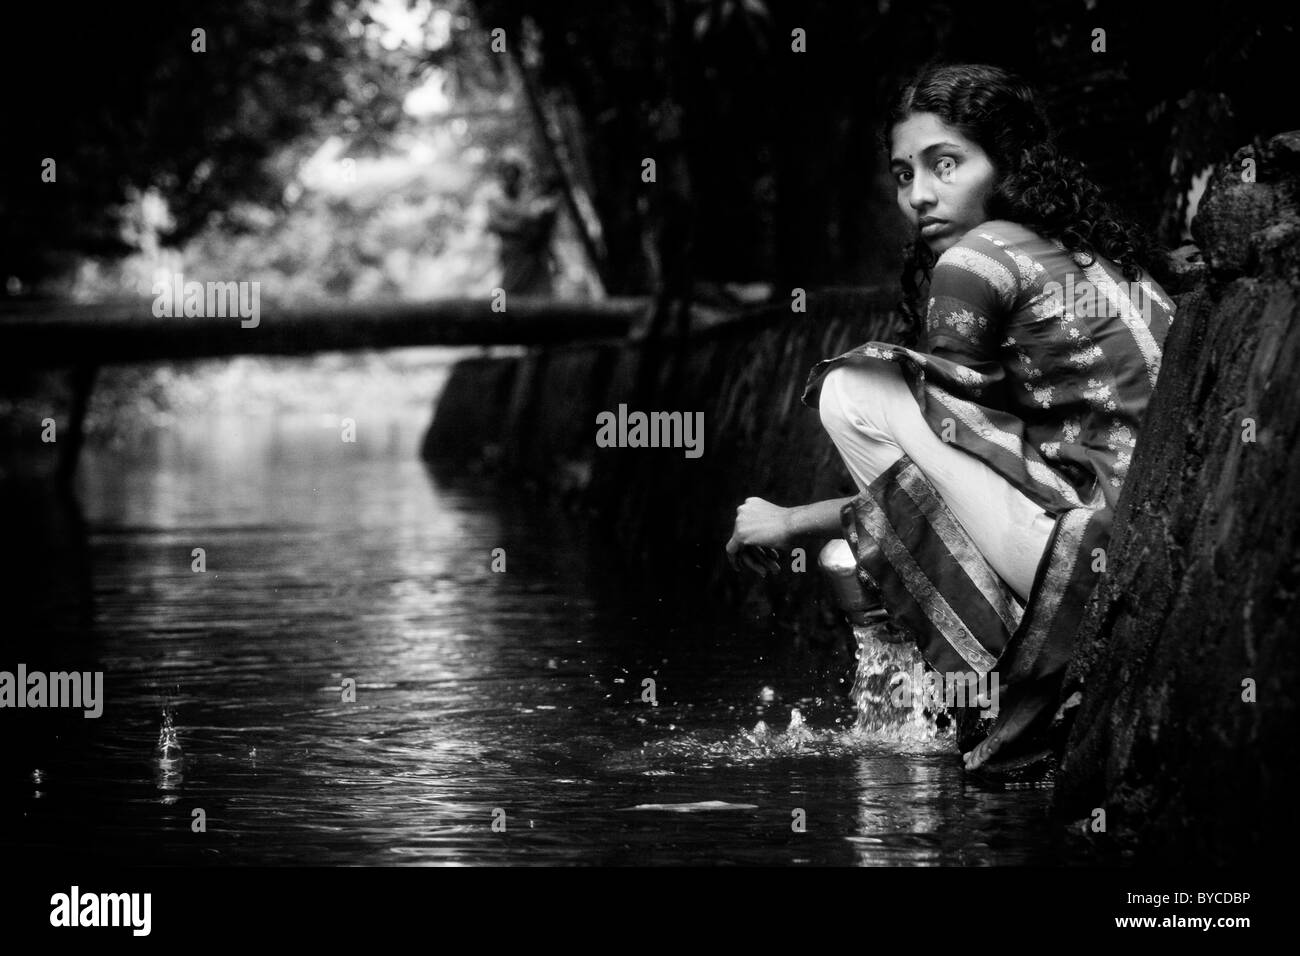 A woman washes dishes in the backwaters near Alappuzha (a.k.a. Alleppey) in Kerala, India. Stock Photo